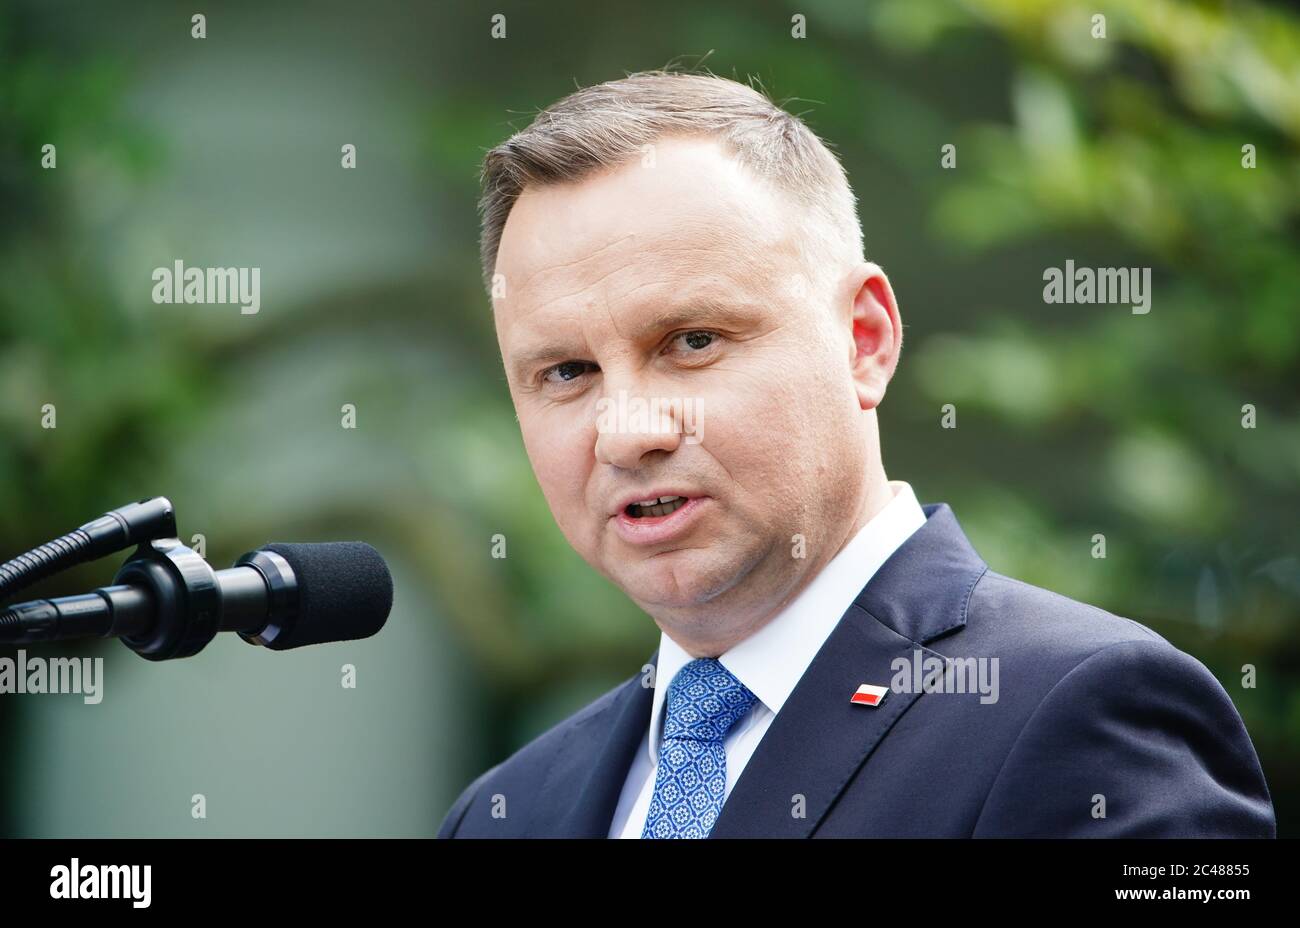 US President Donald J. Trump (not pictured) and Polish President Andrzej Duda hold a joint press conference in the Rose Garden of the White House in Washington, DC, USA, 24 June 2020. Duda, a conservative nationalist facing a tight re-election race back home, is the first foreign leader to visit the White House in more than three months.Credit: Jim LoScalzo/Pool via CNP /MediaPunch Stock Photo